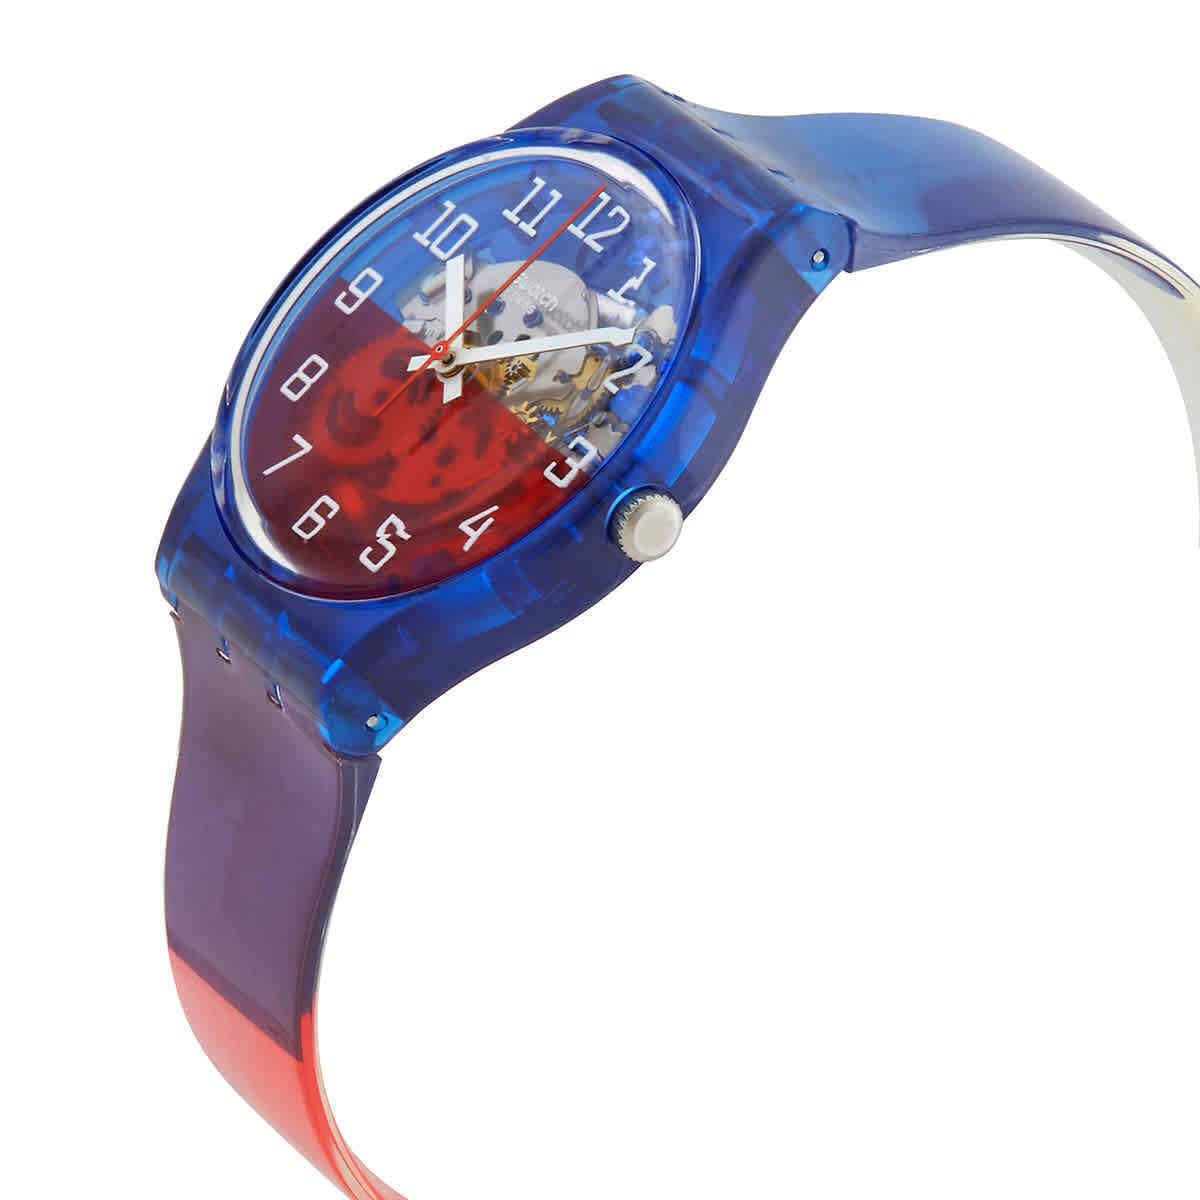 Swatch Originals Verre-toi Silicone Multicolor Striped Watch 34mm GN275 - Dial: Skeleton, Band: Striped multicolor, Bezel: Blue transparent